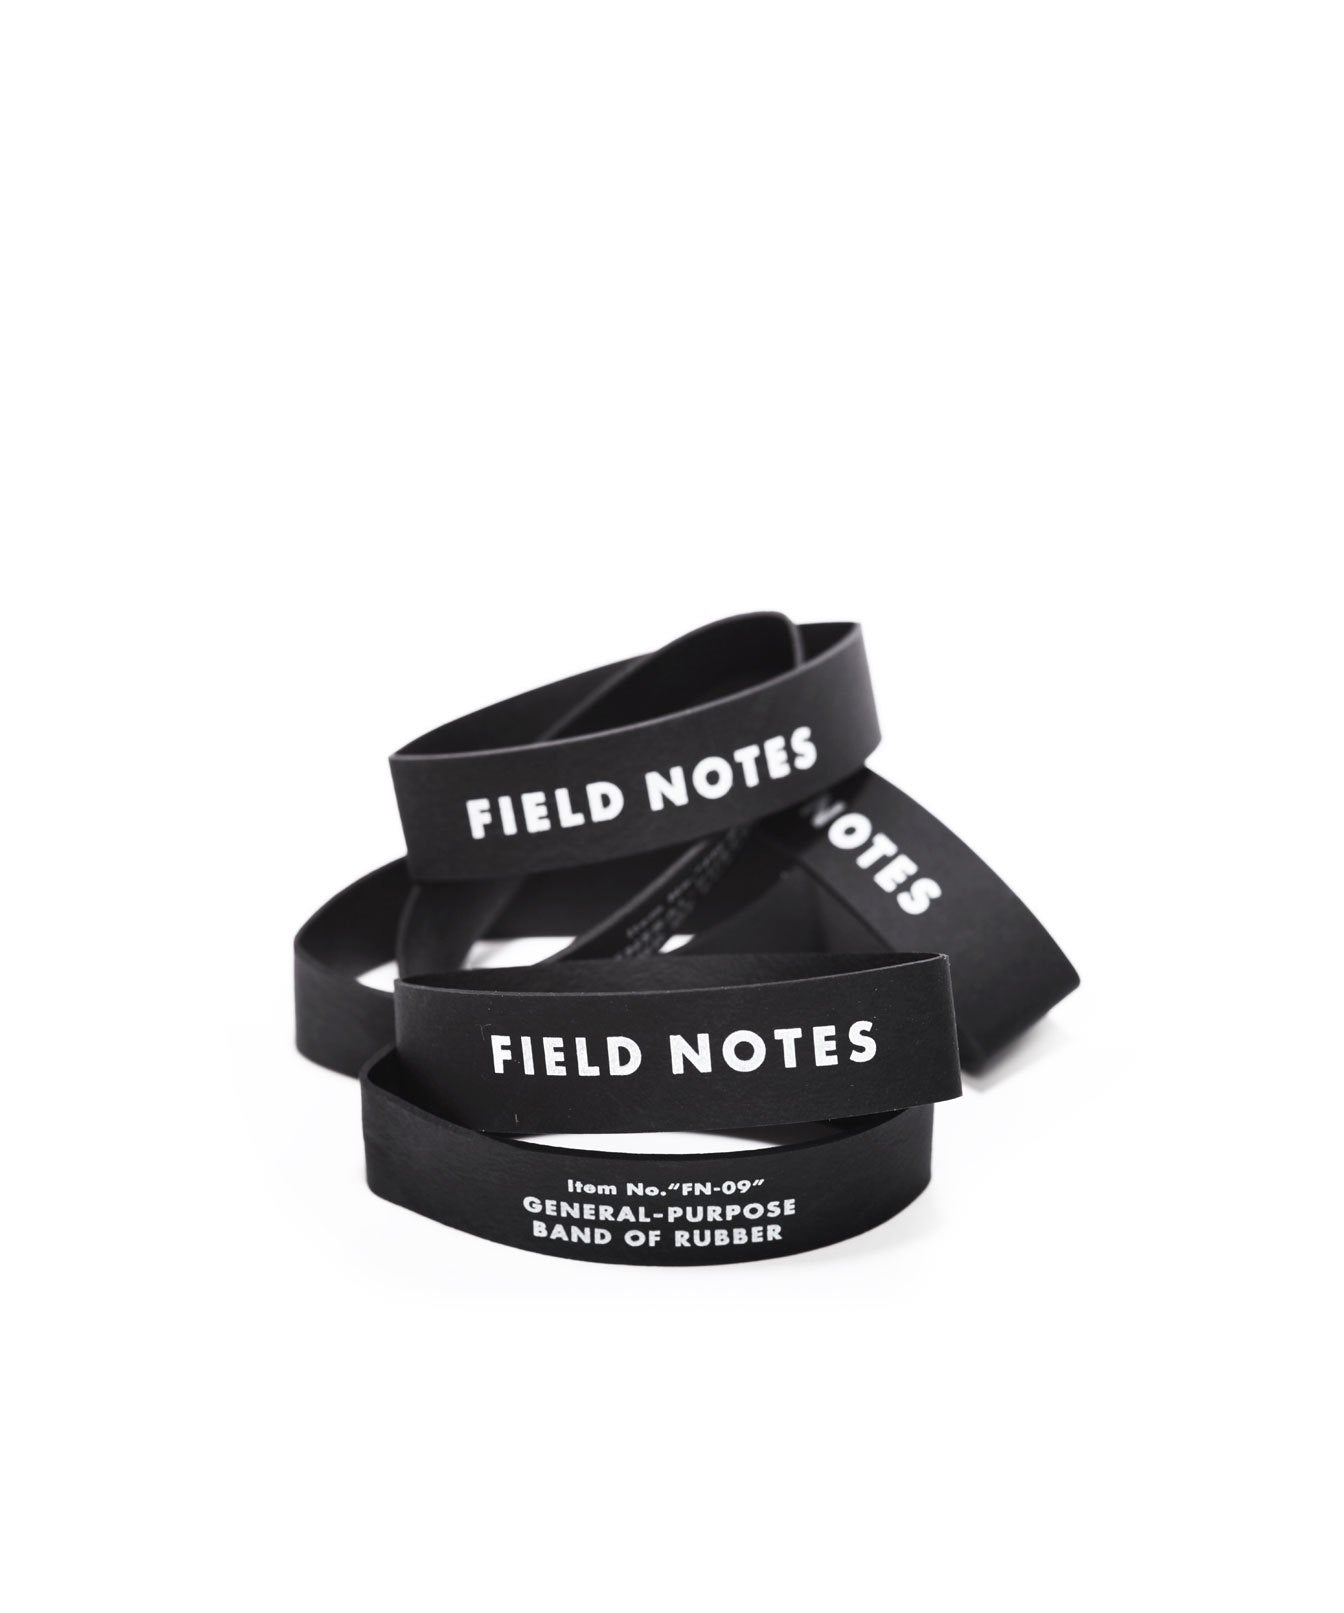 Field Notes - Bands of Rubber